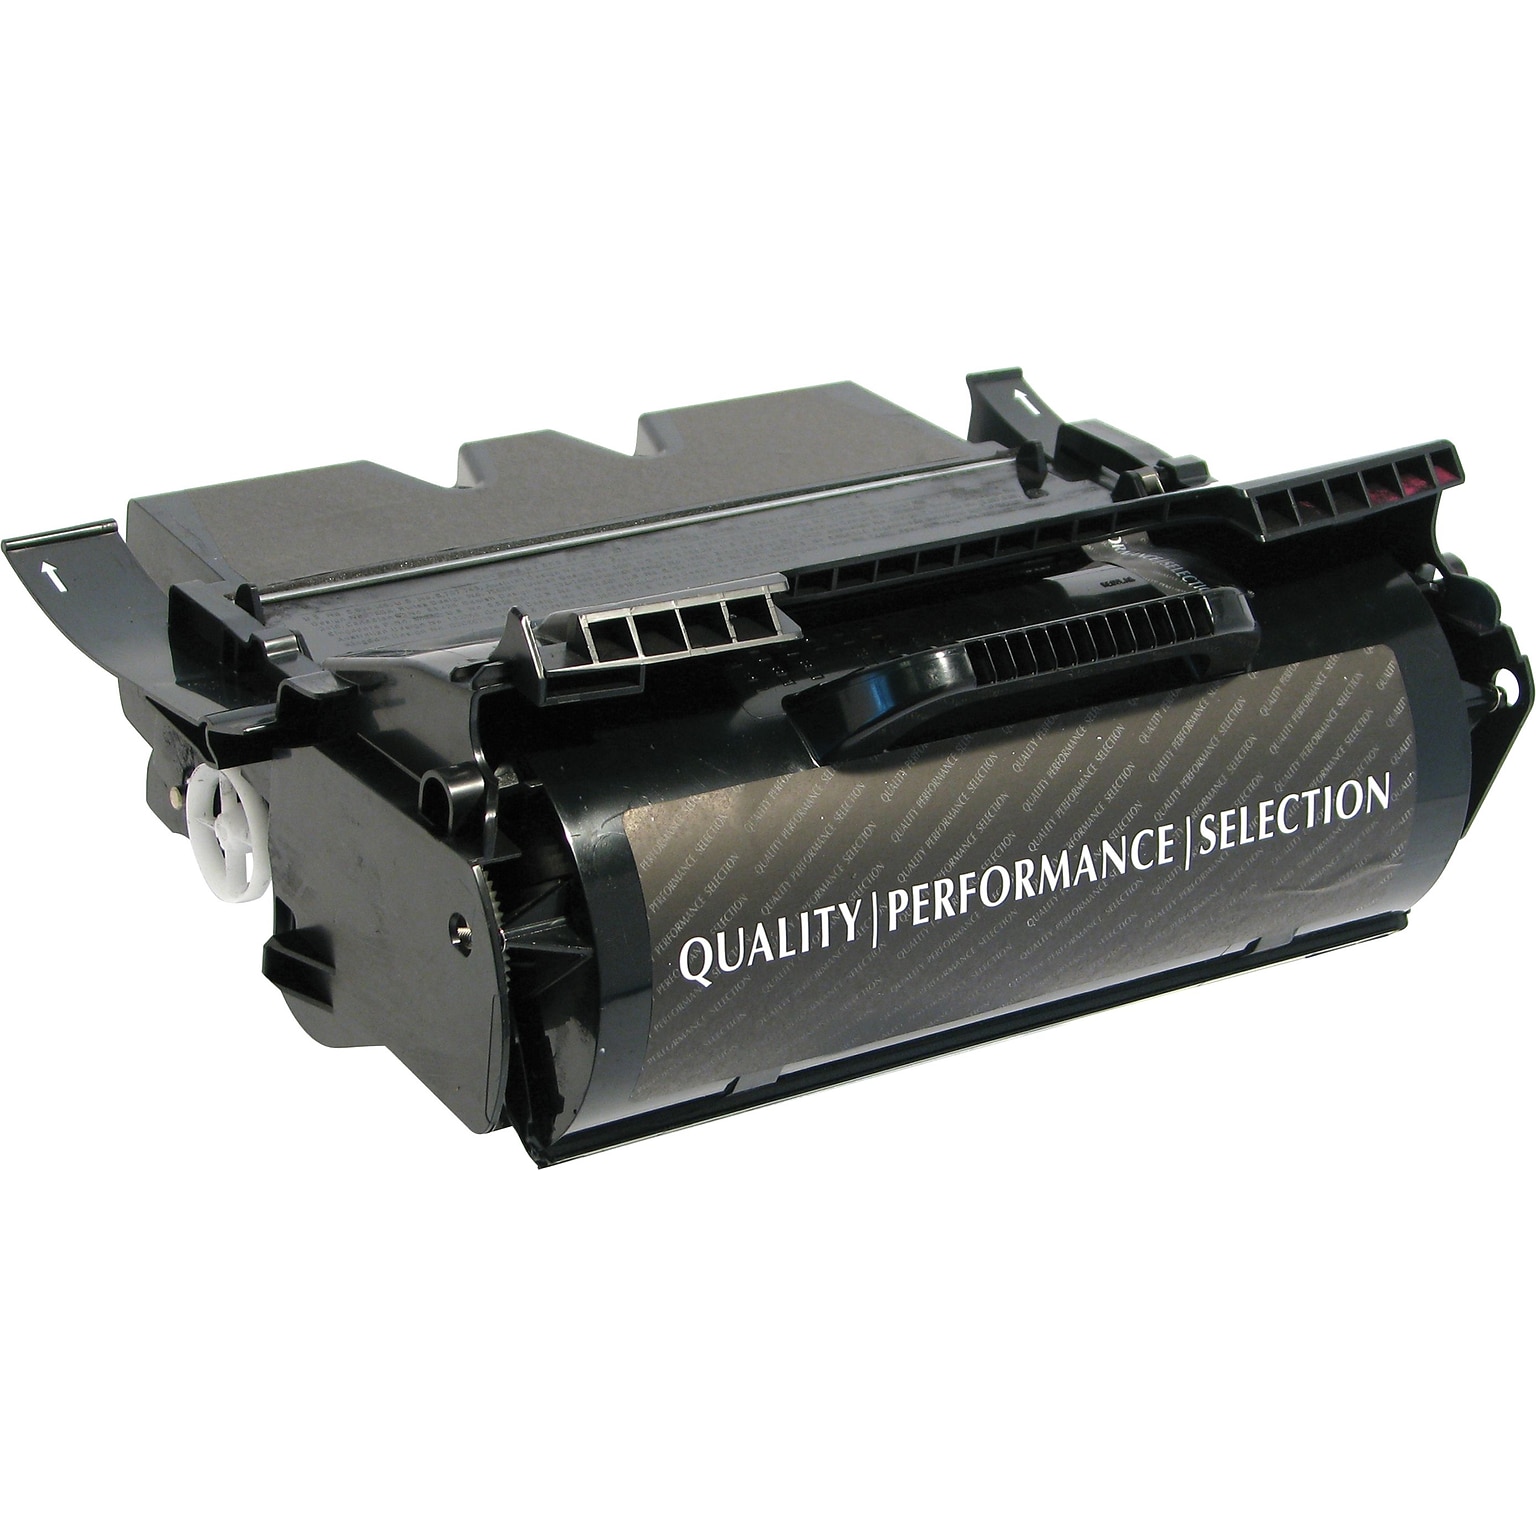 Quill Brand® Remanufactured Black High Yield Toner Cartridge Replacement for Dell 5210/5310 (UG215) (Lifetime Warranty)